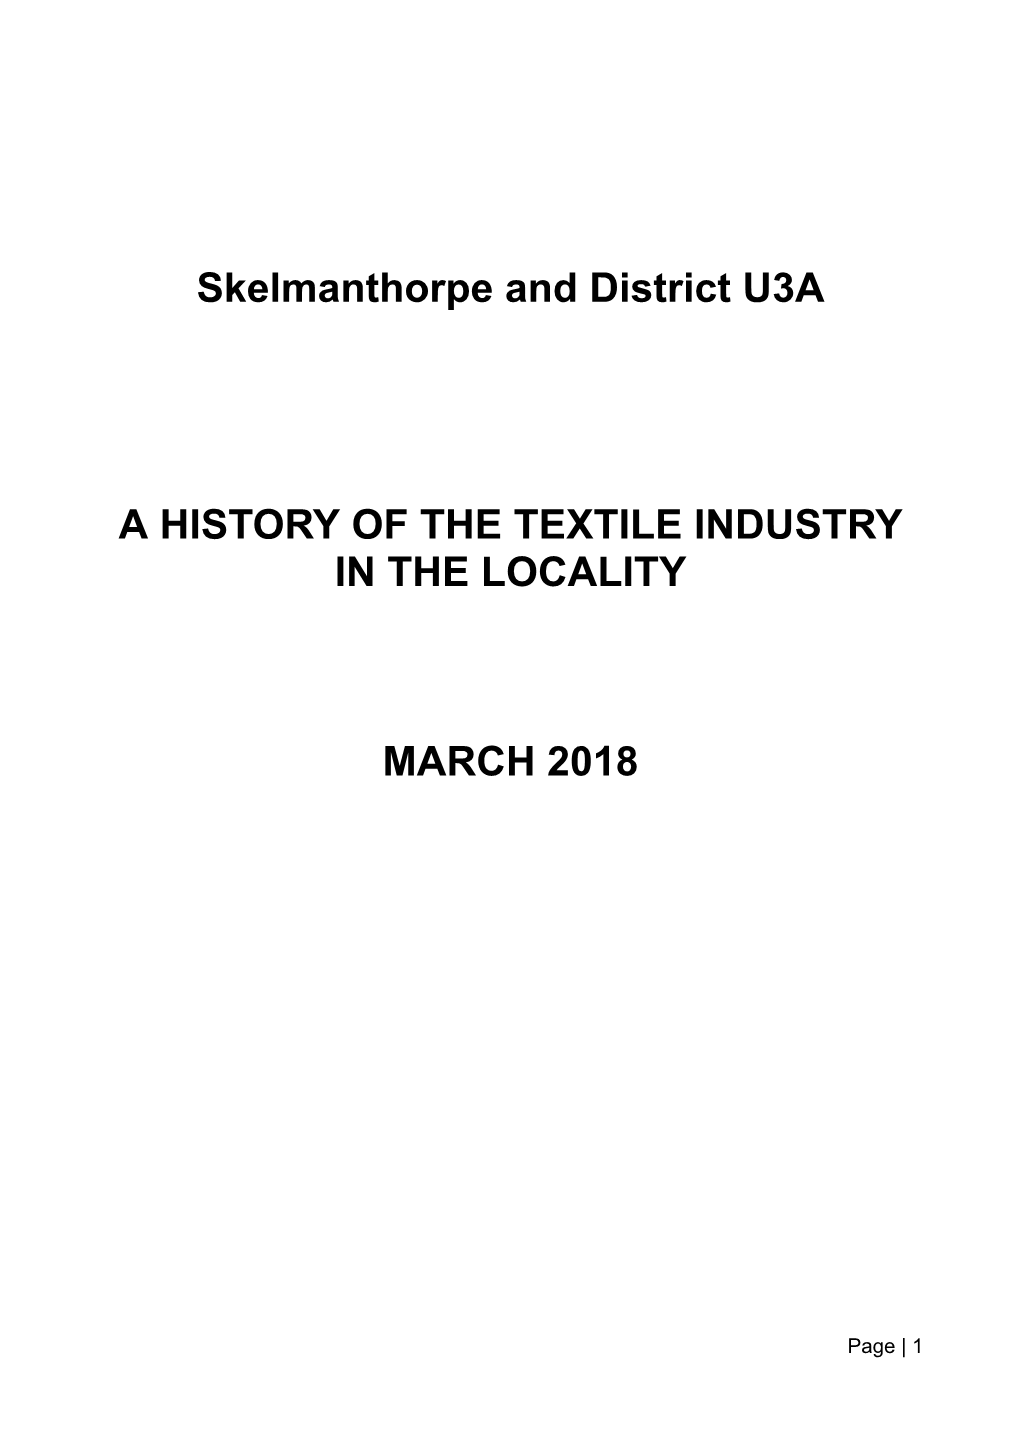 Skelmanthorpe and District U3A a HISTORY of the TEXTILE